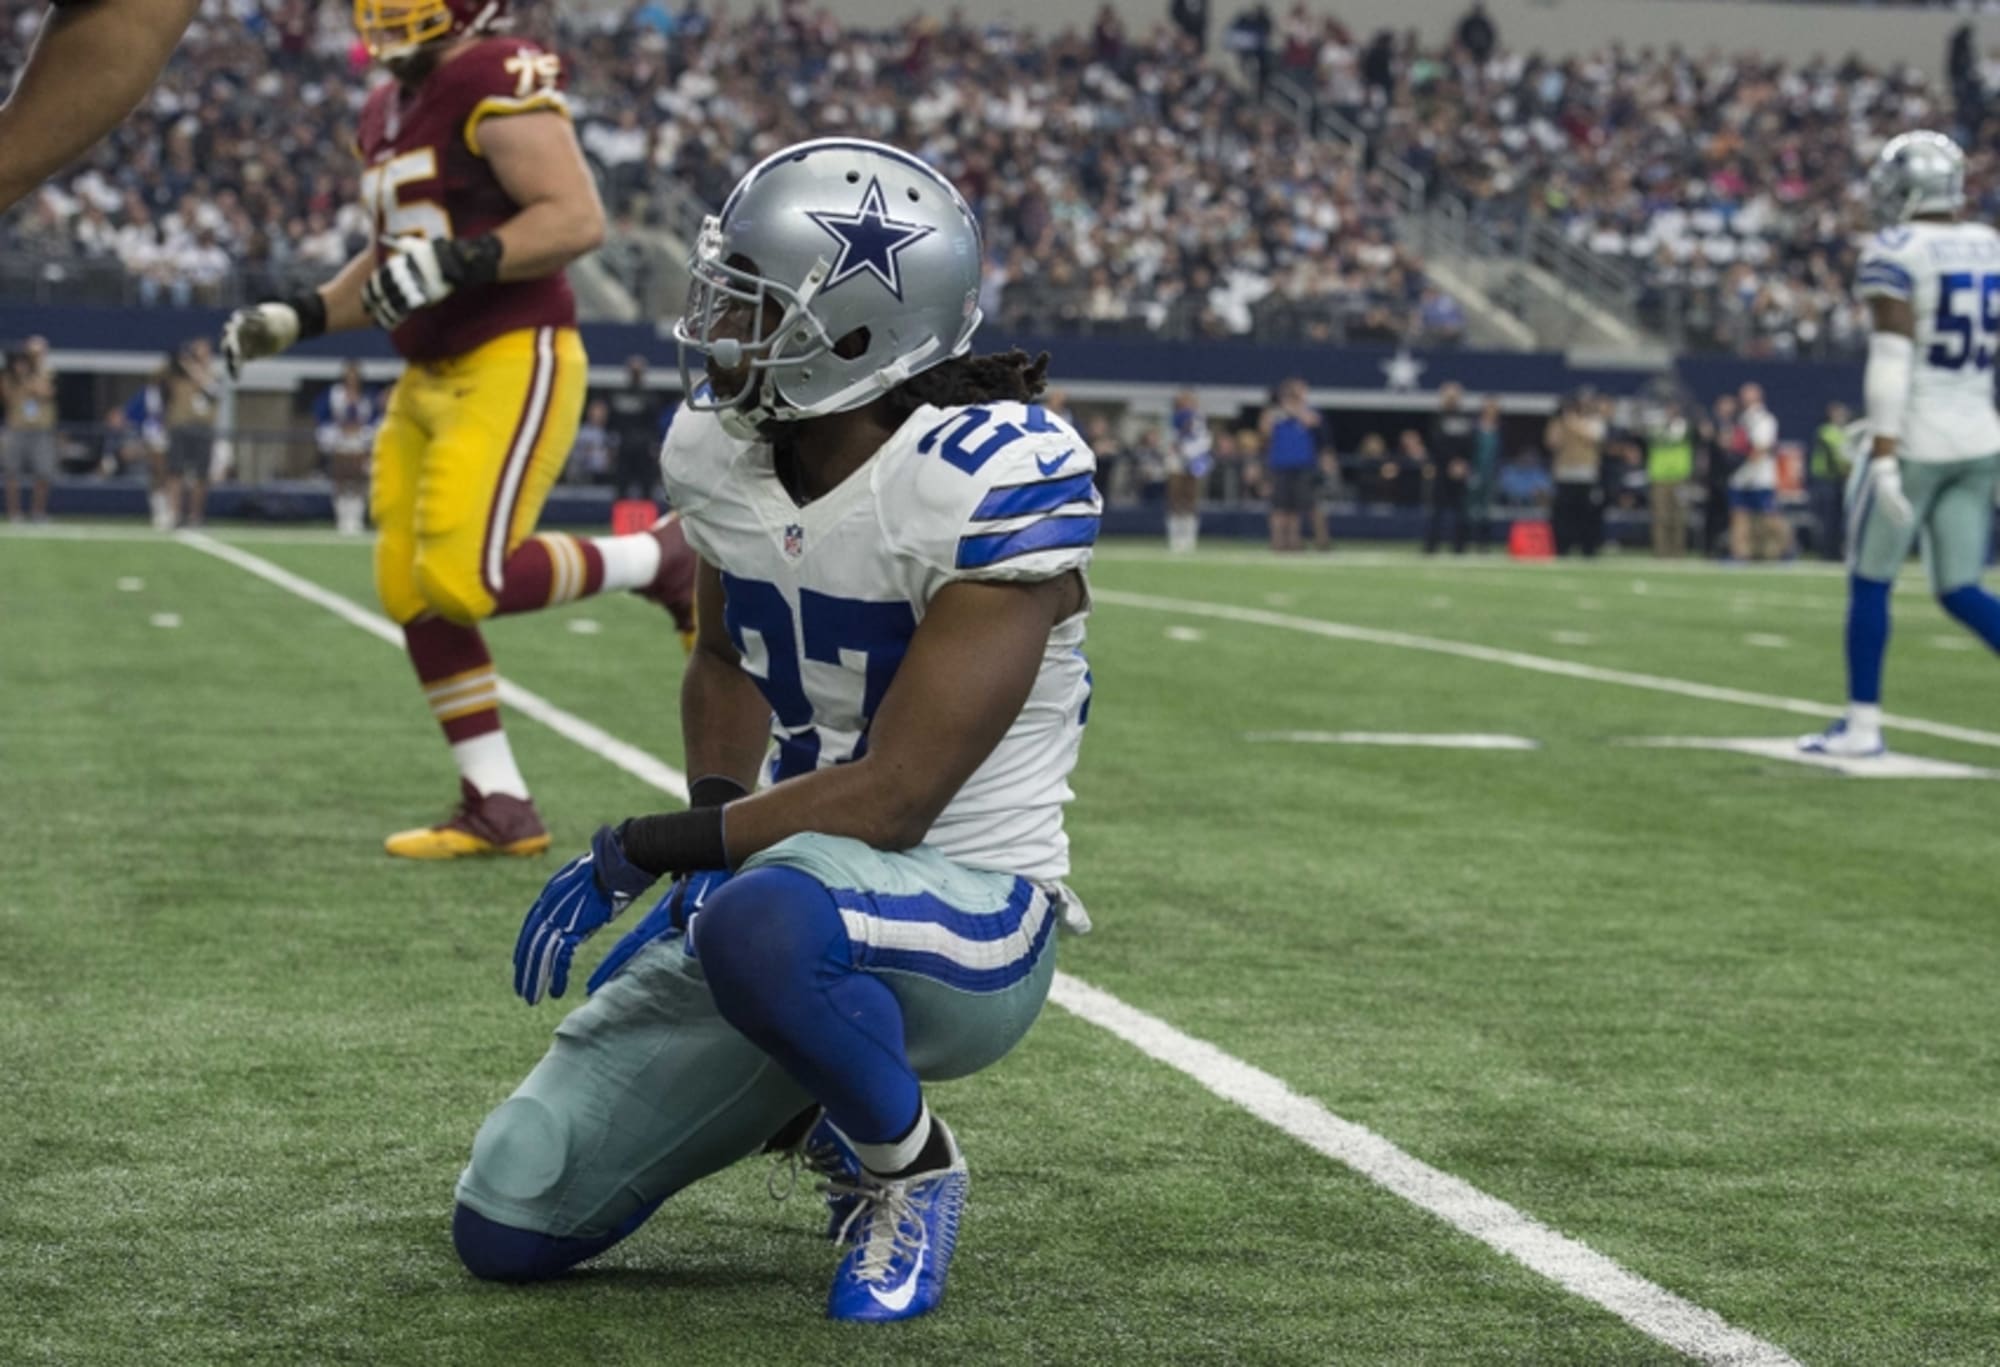 Cowboys safety J.J. Wilcox: “I'm still growing at the position